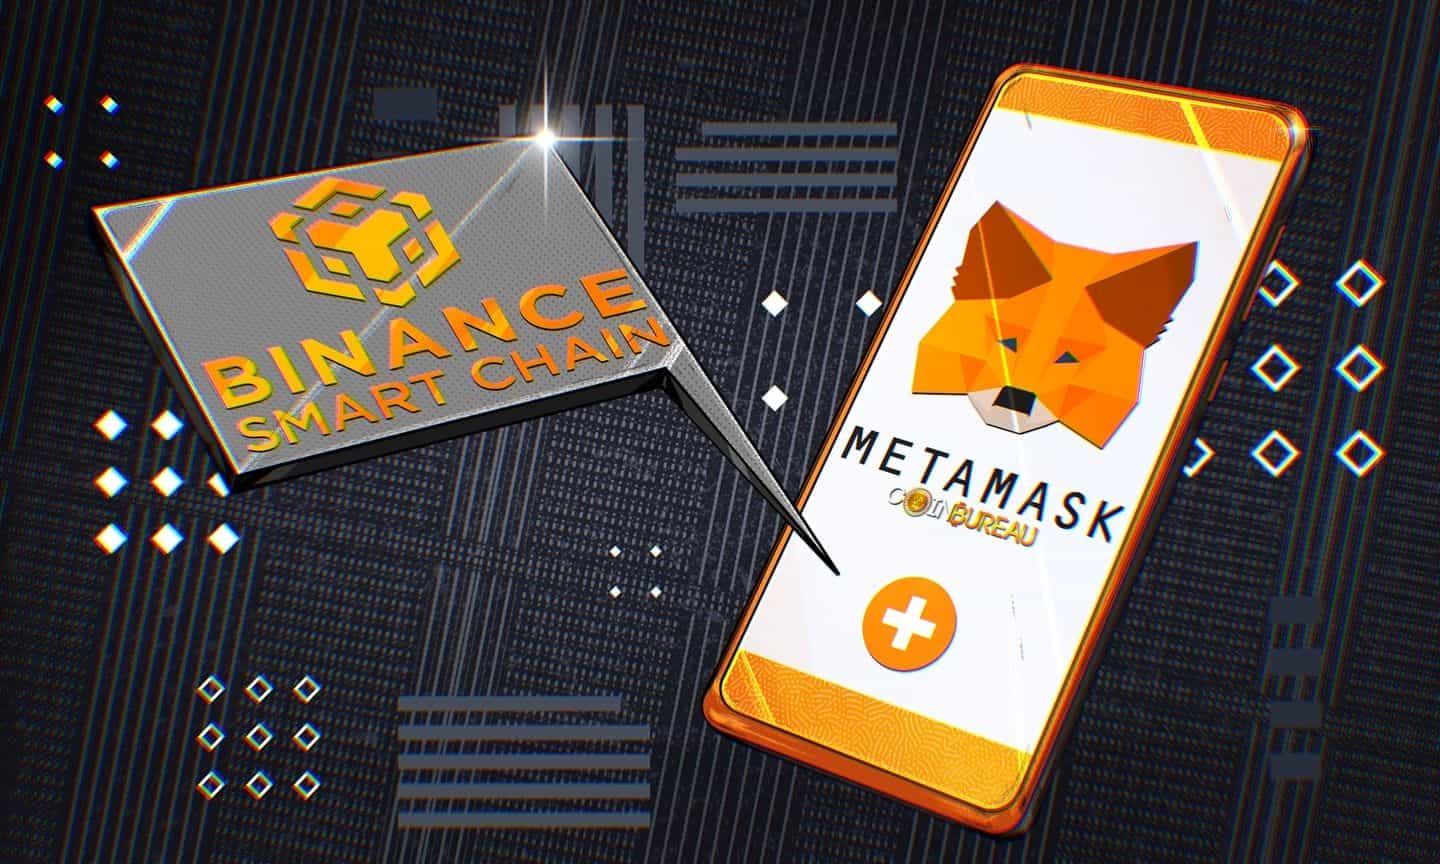 Connecting the Binance Smart Chain to Metamask